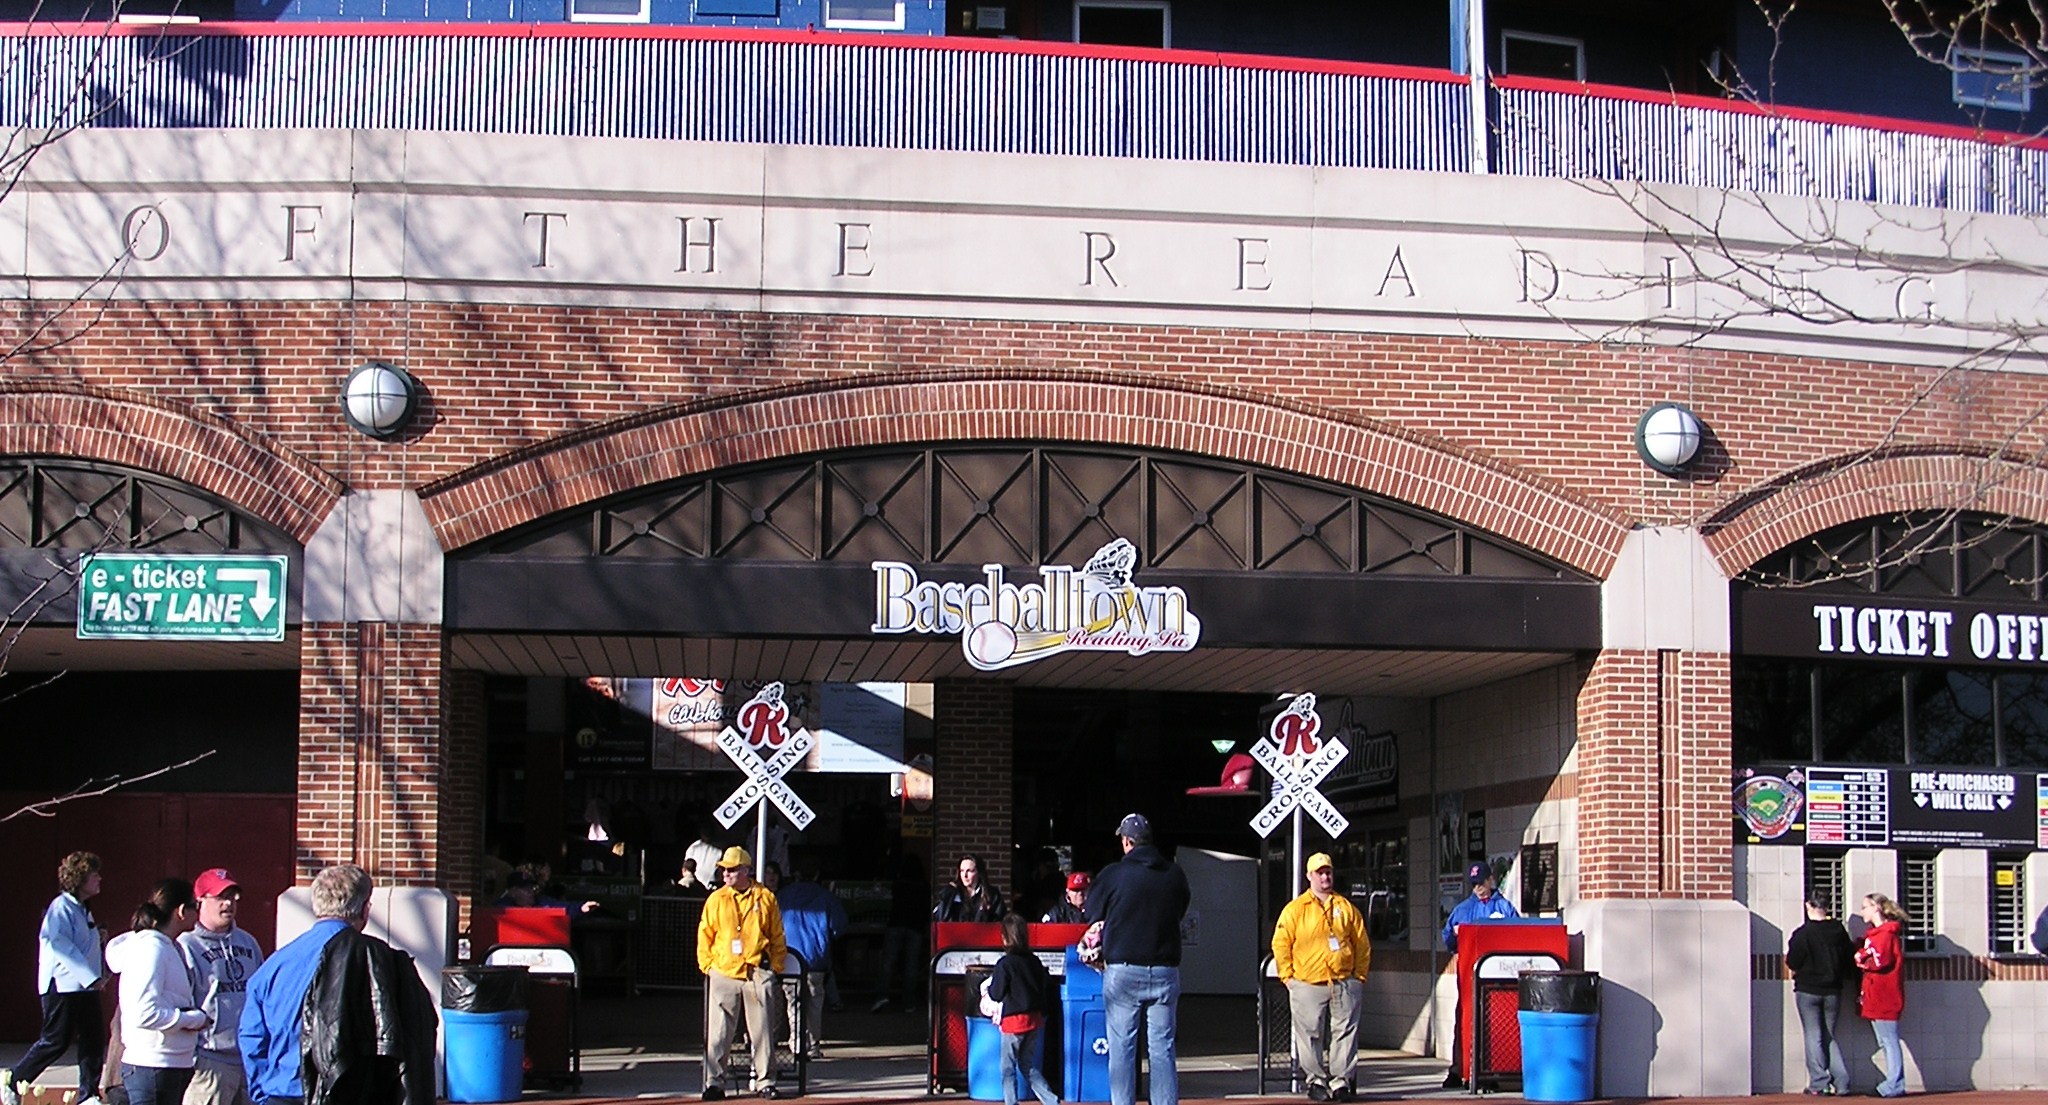 Take a ride on the Reading - Reading Phillies